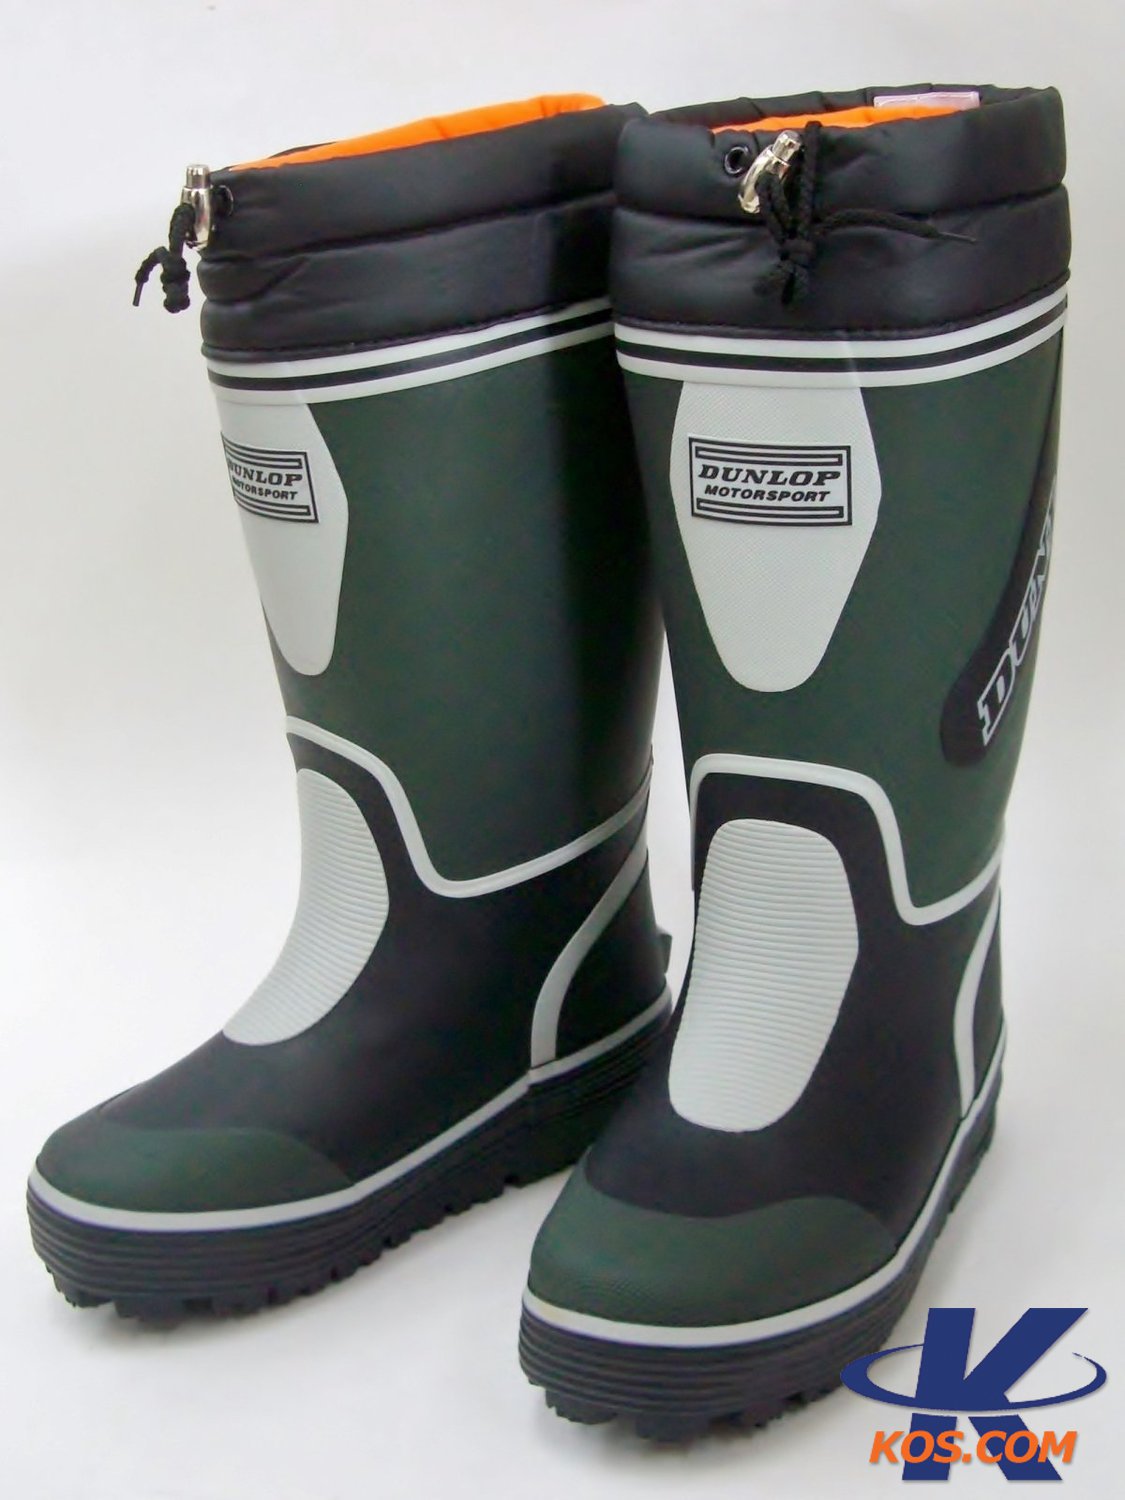 DUNLOP DOLMAN G 290 Rubber boots with socks! Winter boots.